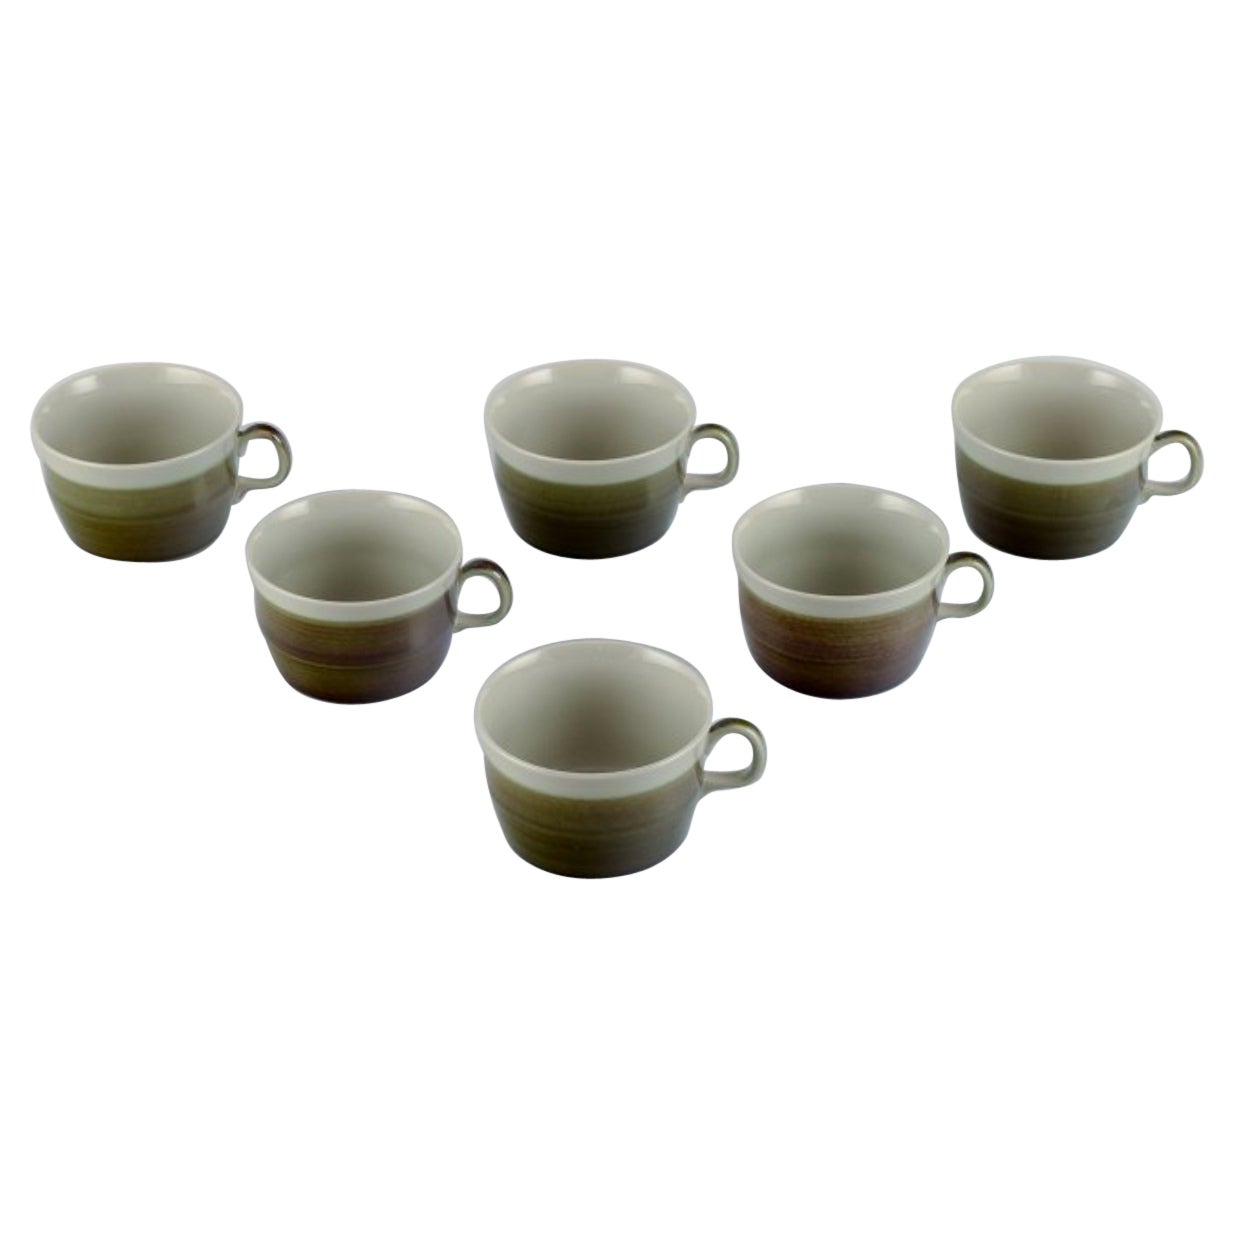 Marianne Westman for Rörstrand. "Maya", set of six coffee cups in stoneware